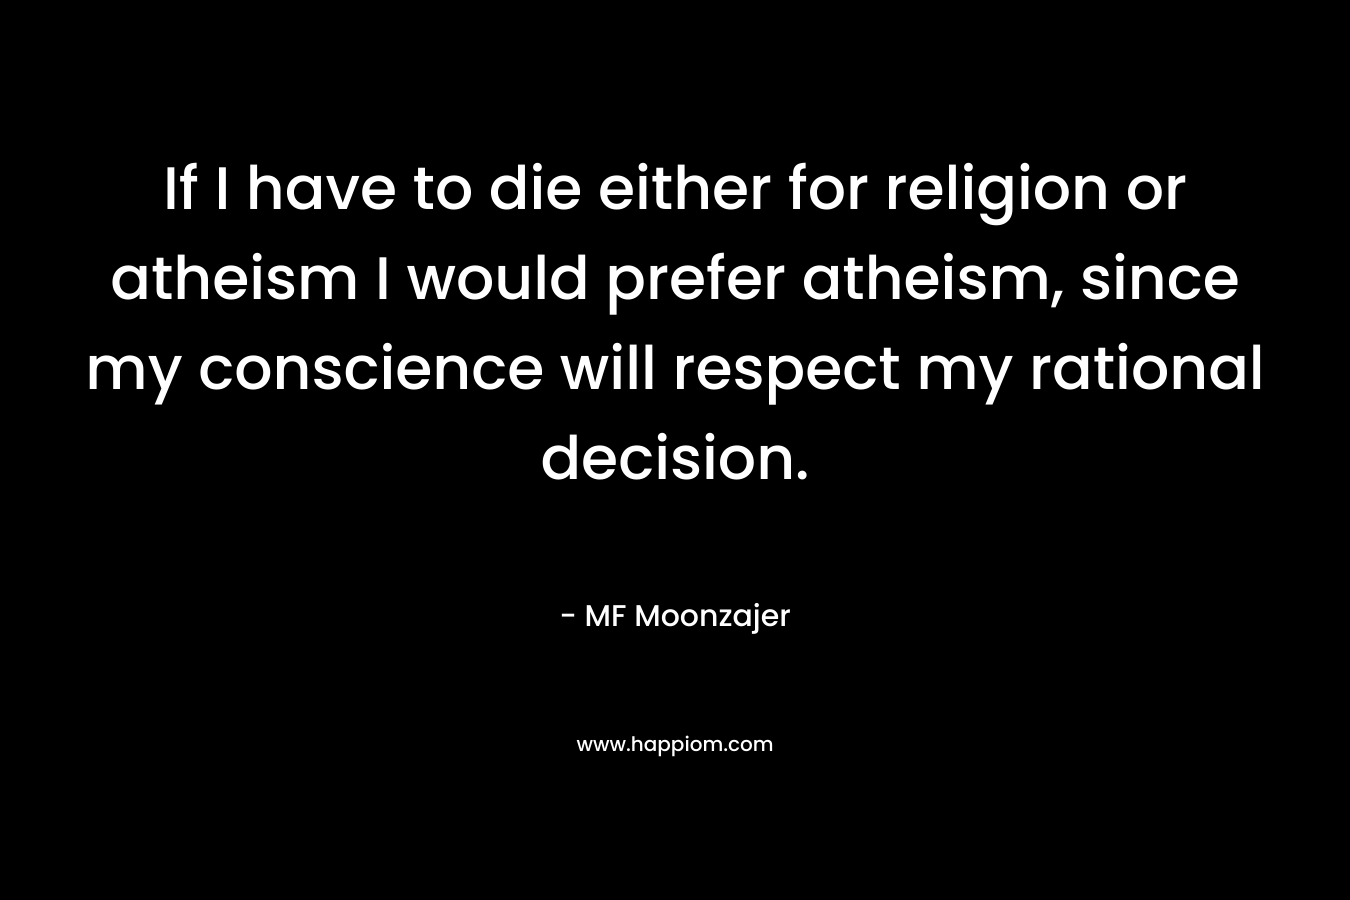 If I have to die either for religion or atheism I would prefer atheism, since my conscience will respect my rational decision.